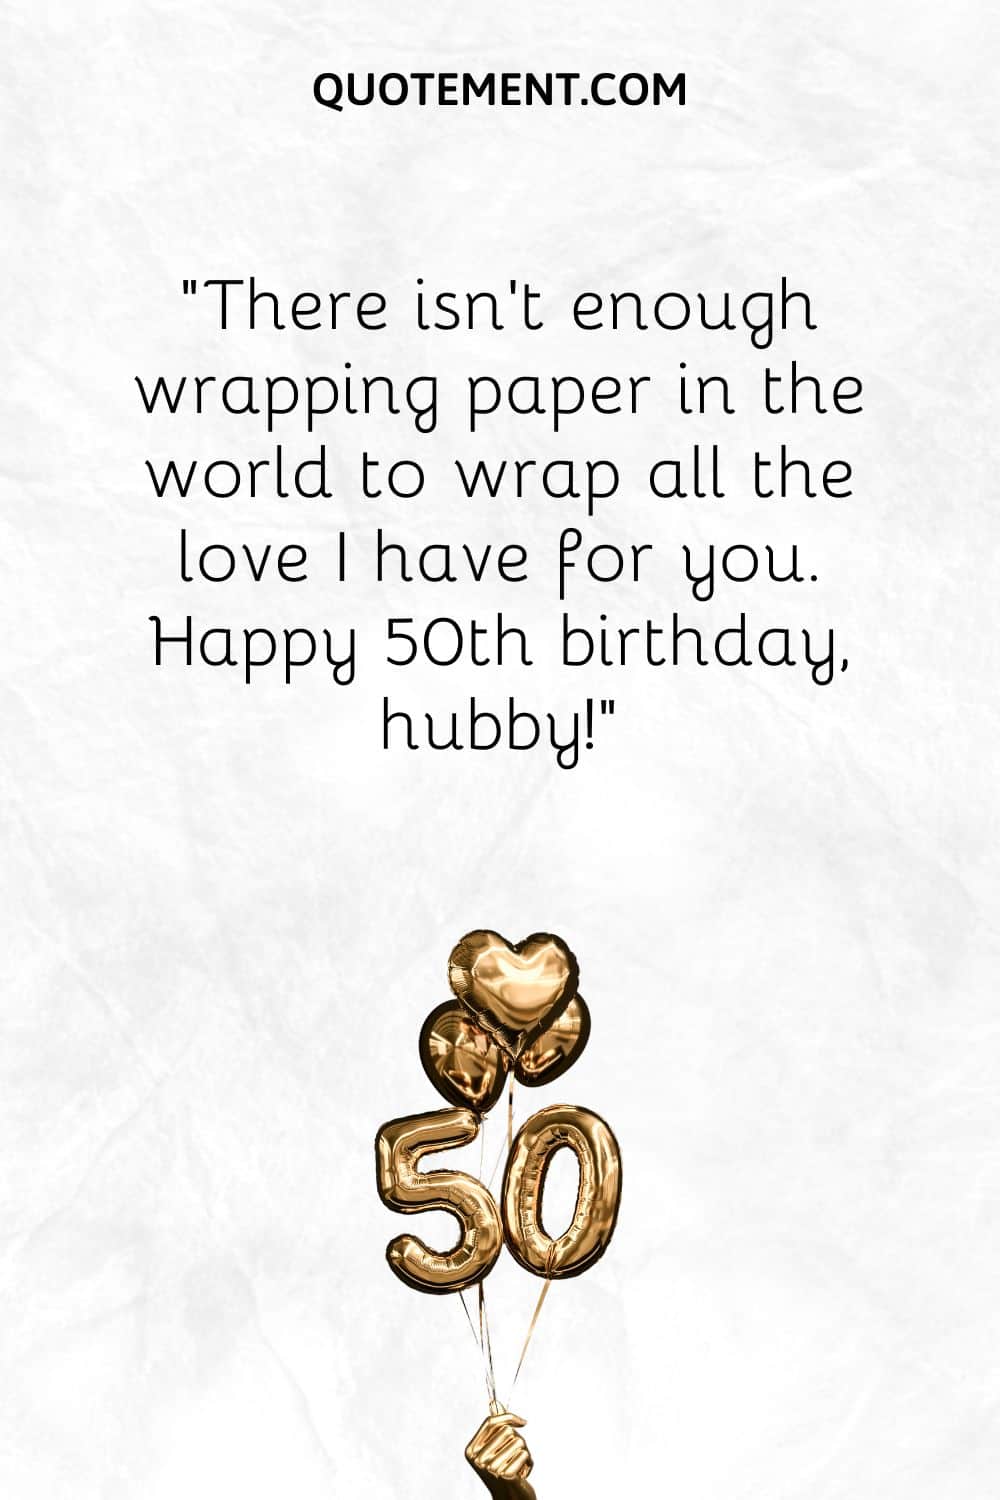 “There isn't enough wrapping paper in the world to wrap all the love I have for you. Happy 50th birthday, hubby!”